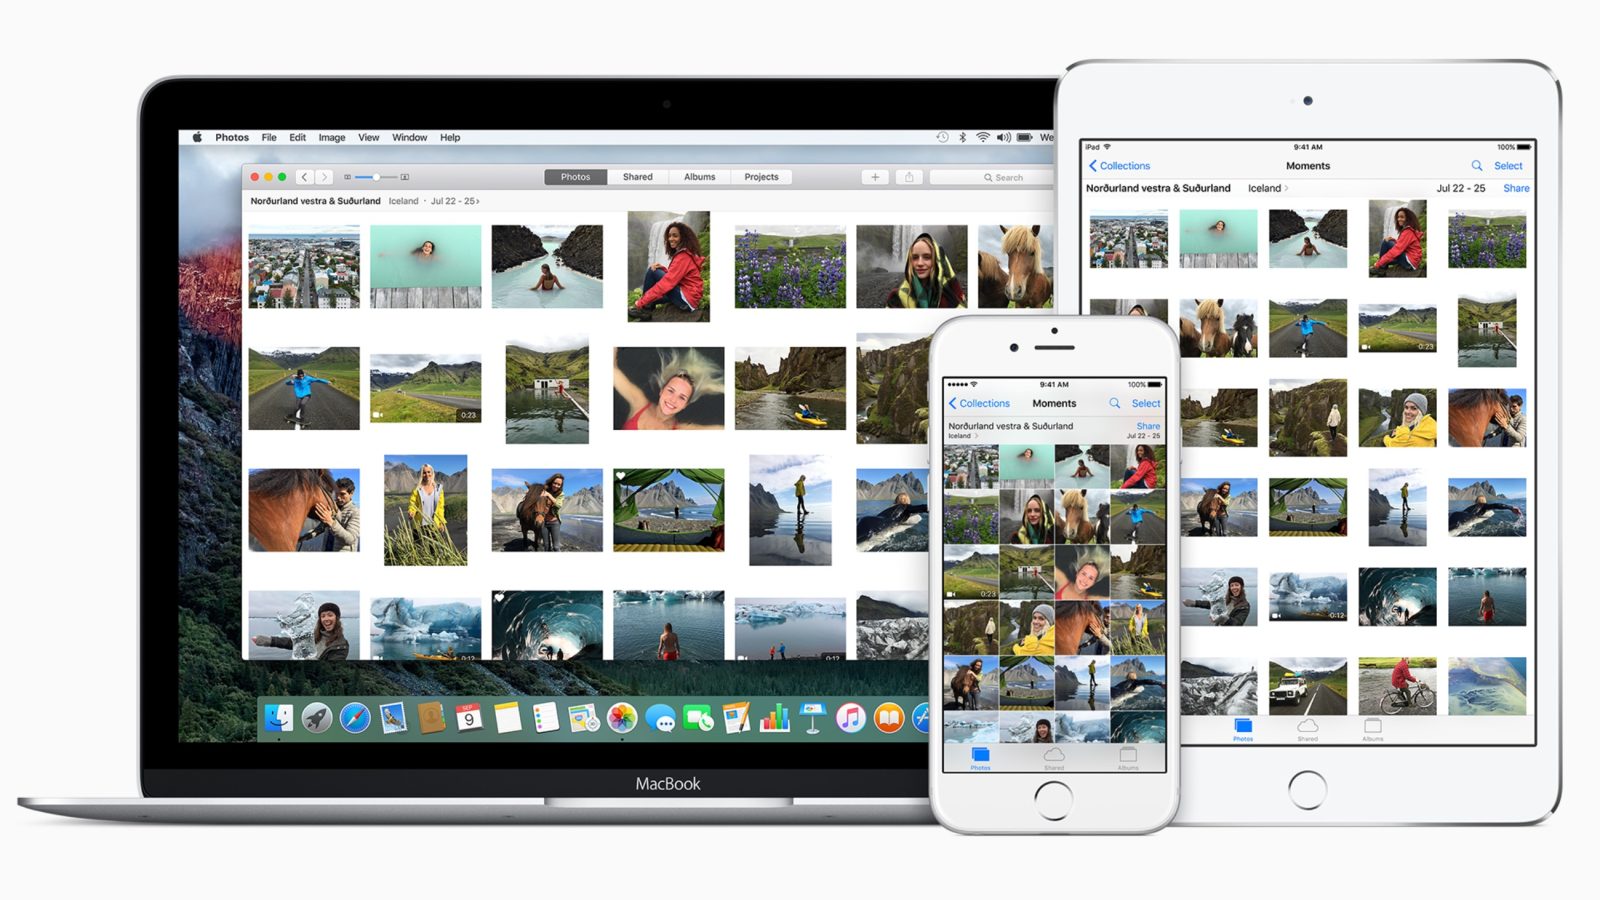 Mac How To Free Up Space With Icloud Photos Optimized Storage 9to5mac,Abandoned Town For Sale 2020